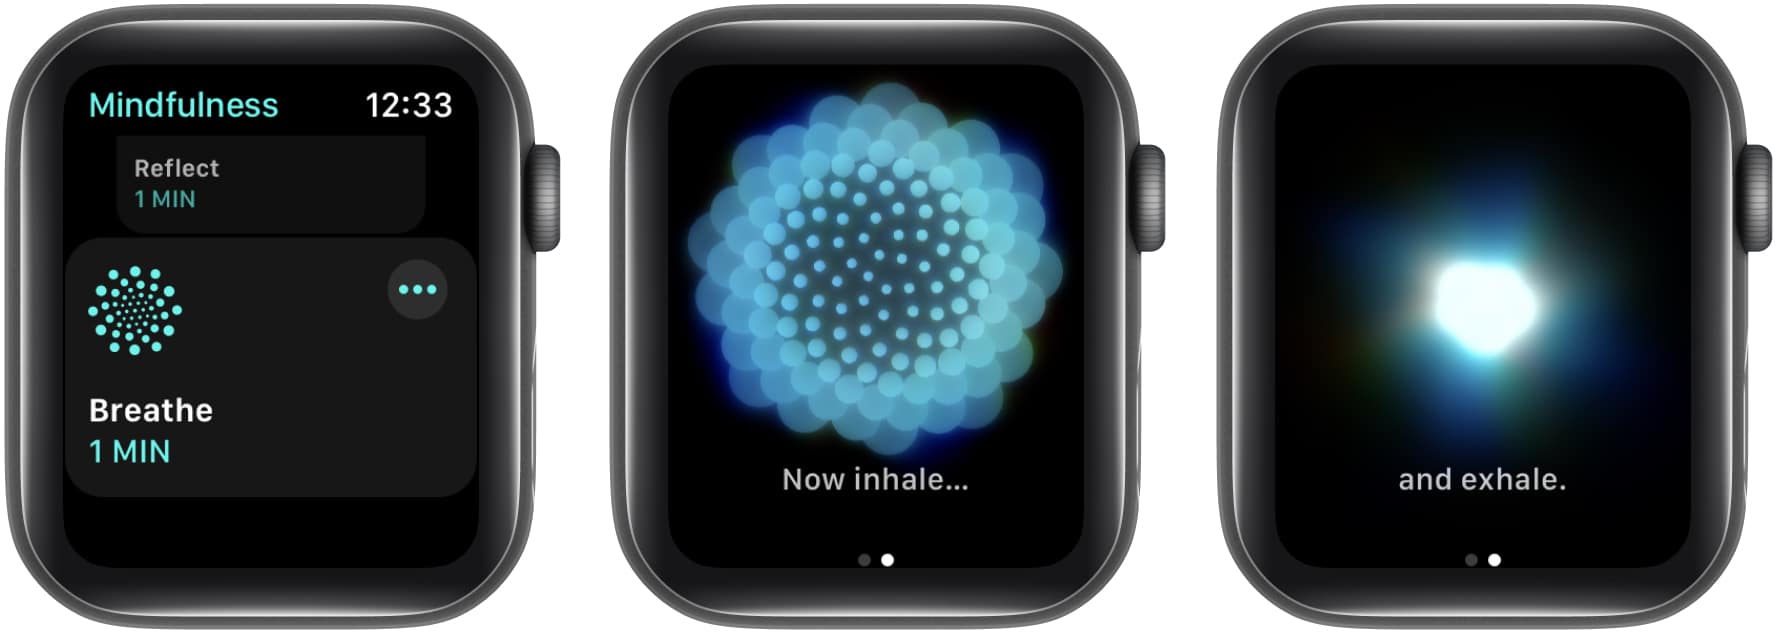 Breathe and Follow instruction on Apple Watch